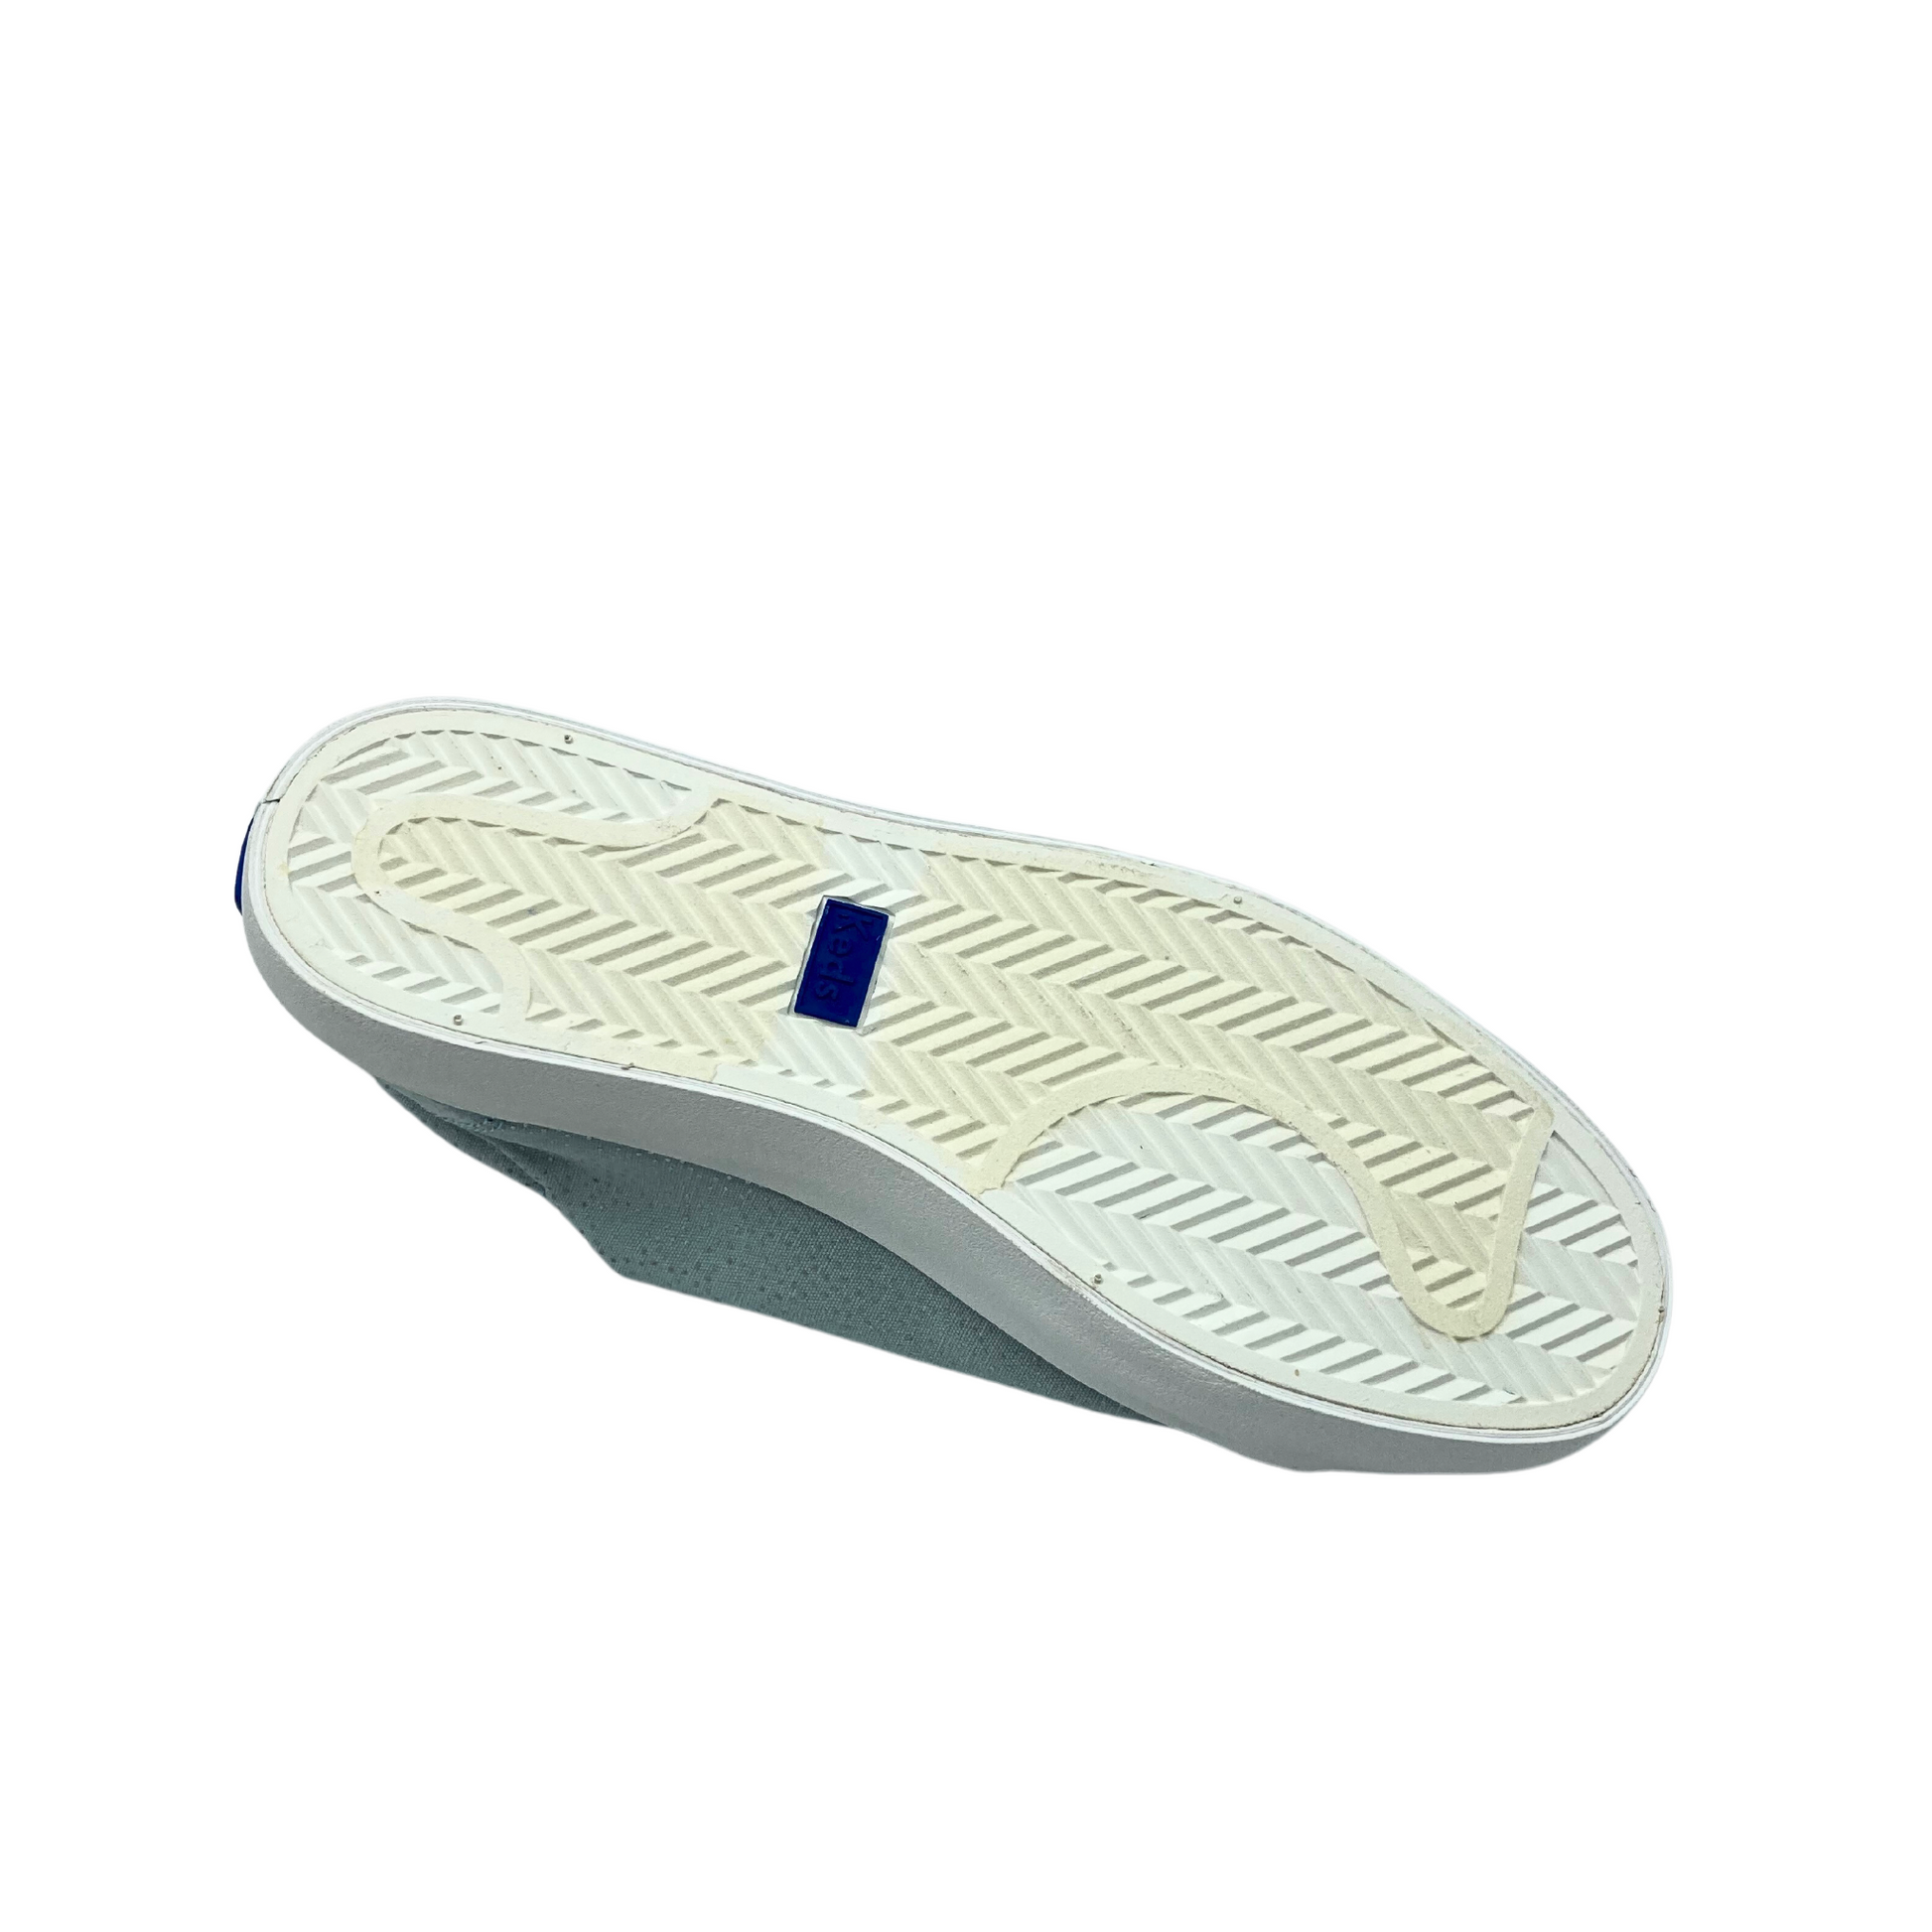 White rubber sole of the Keds Canvas Kickback Dots sneaker